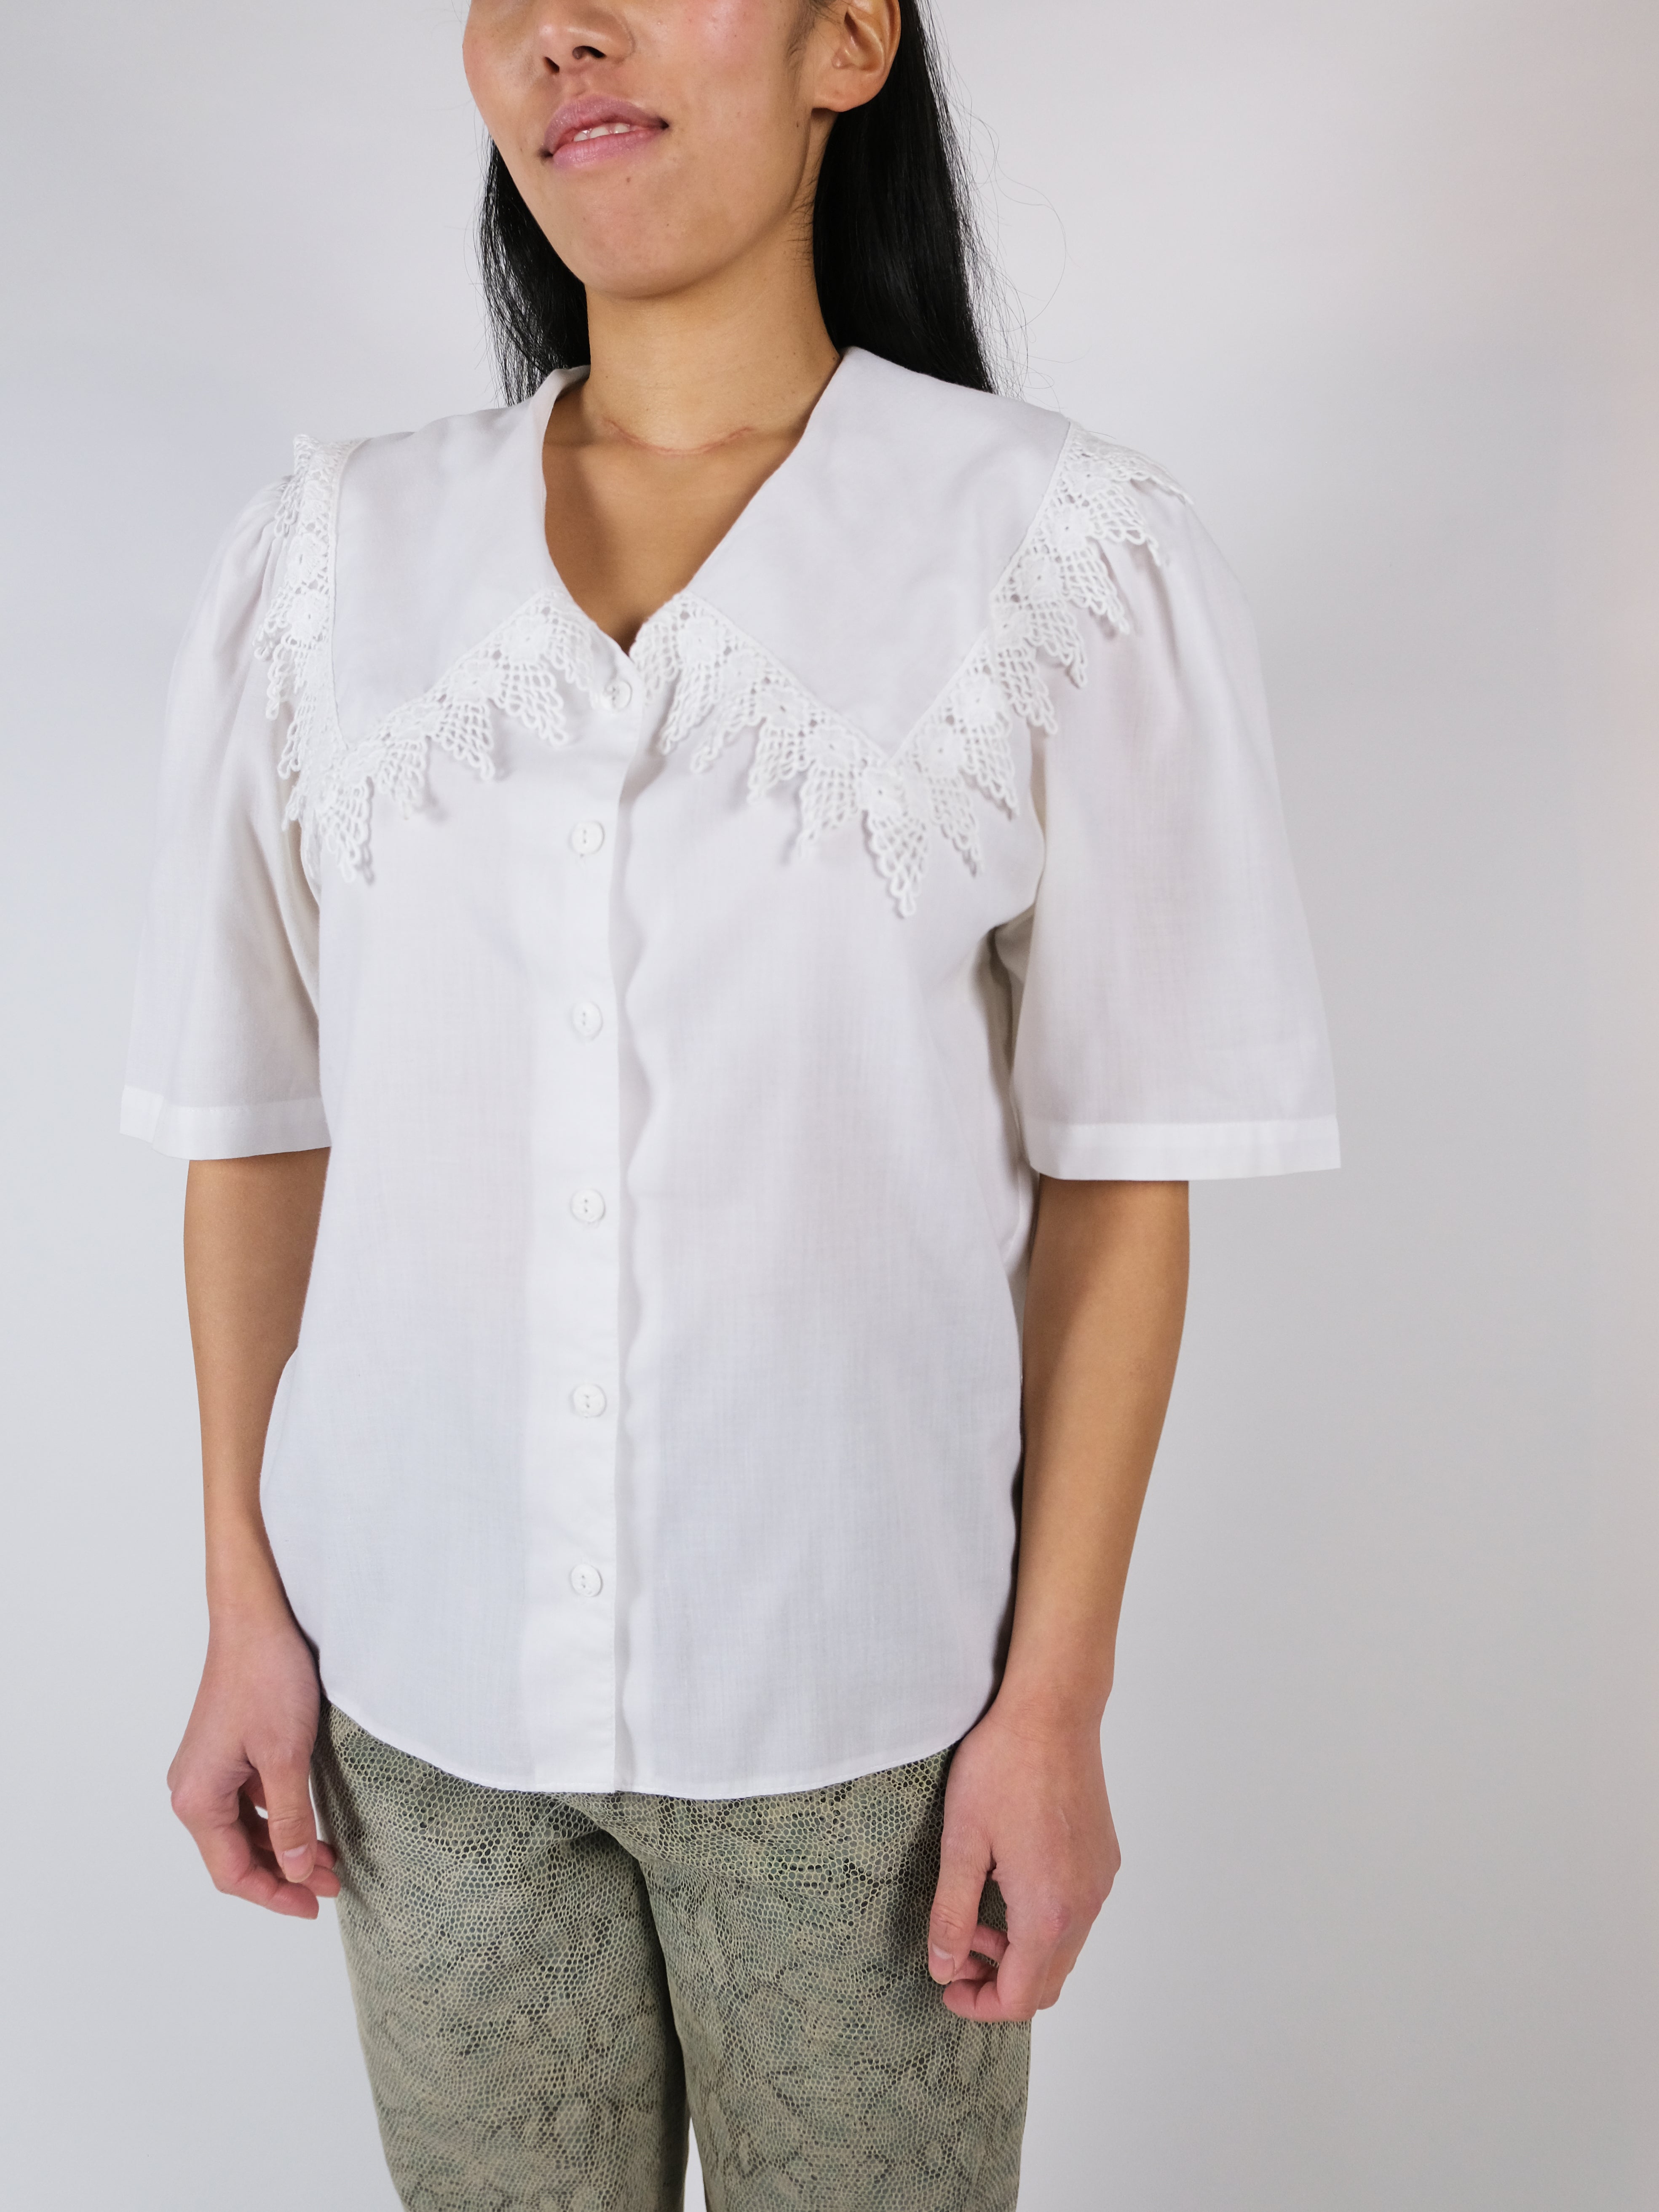 Collared blouse white short sleeves